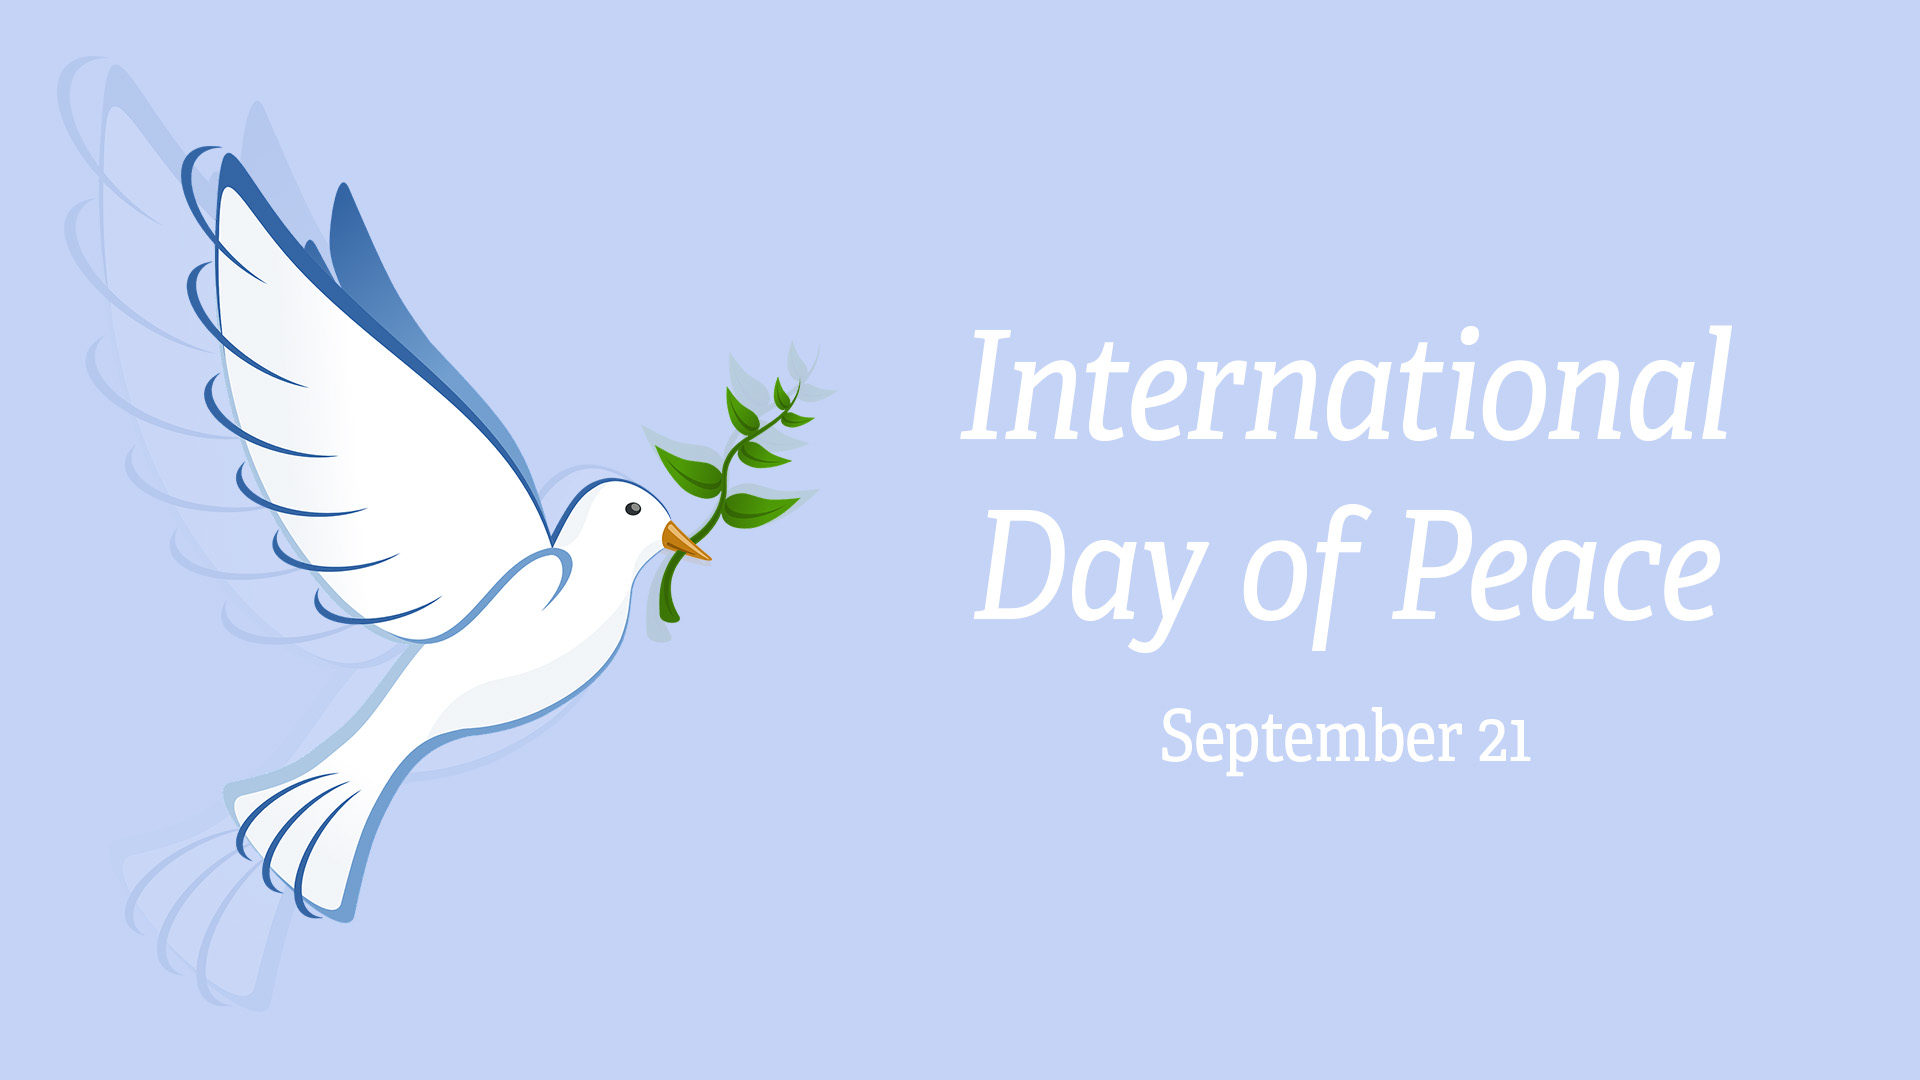 Light purple, lilac background. Right side of image reads International Day of Peace September 21 in white serif letters. A white dove with blue outlines holding a green leaf olive branch is on the left. A bigger paler, fainter, transparent dove shadow is behind the dove.